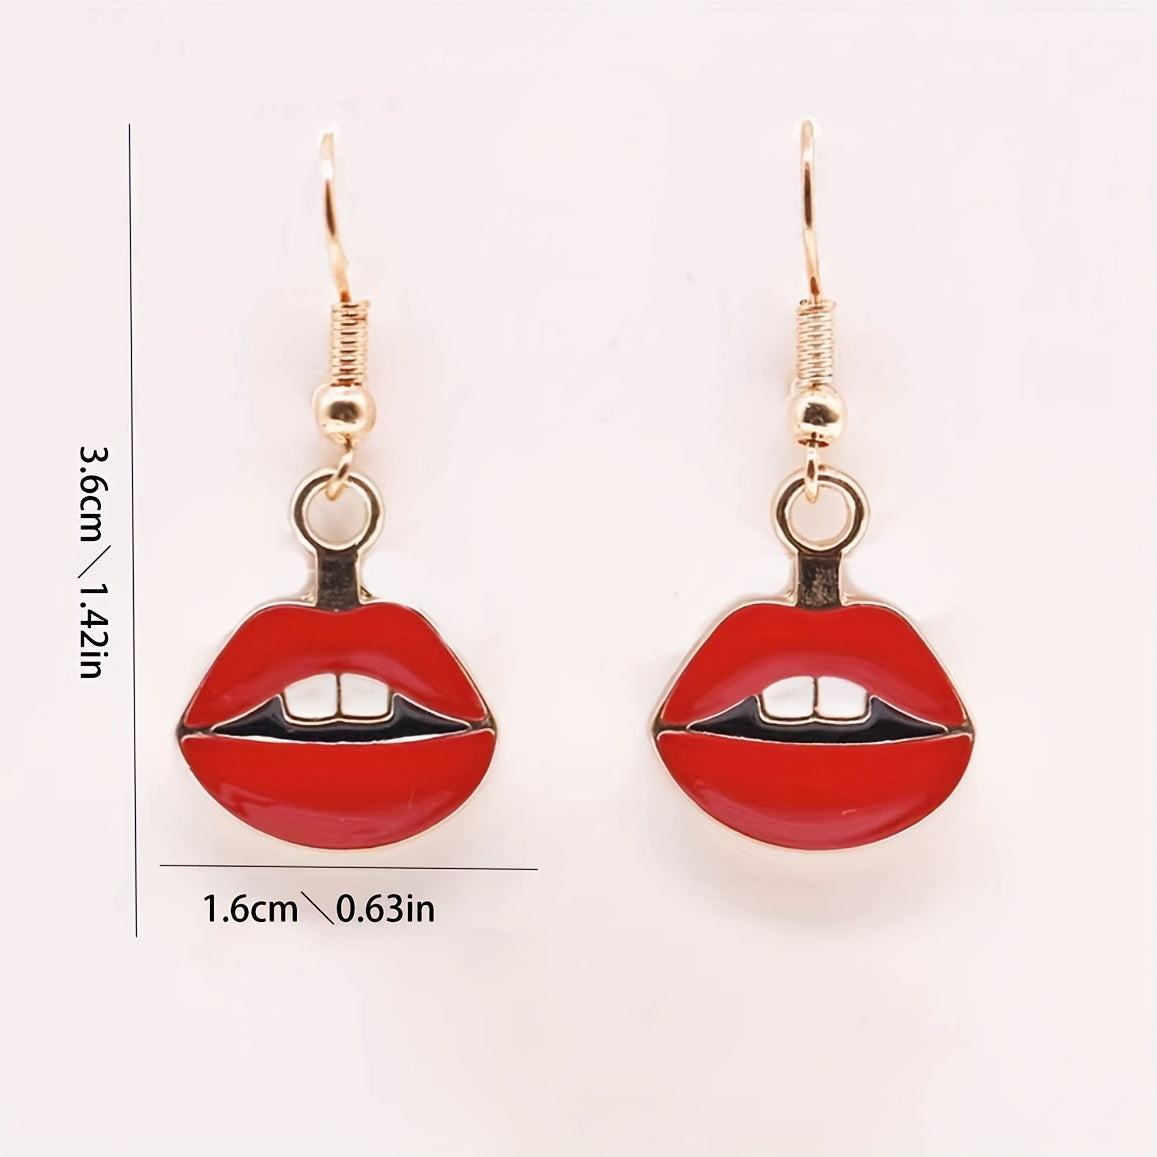 Make a statement with these vintage red lips drop earrings - perfect for parties and costumes